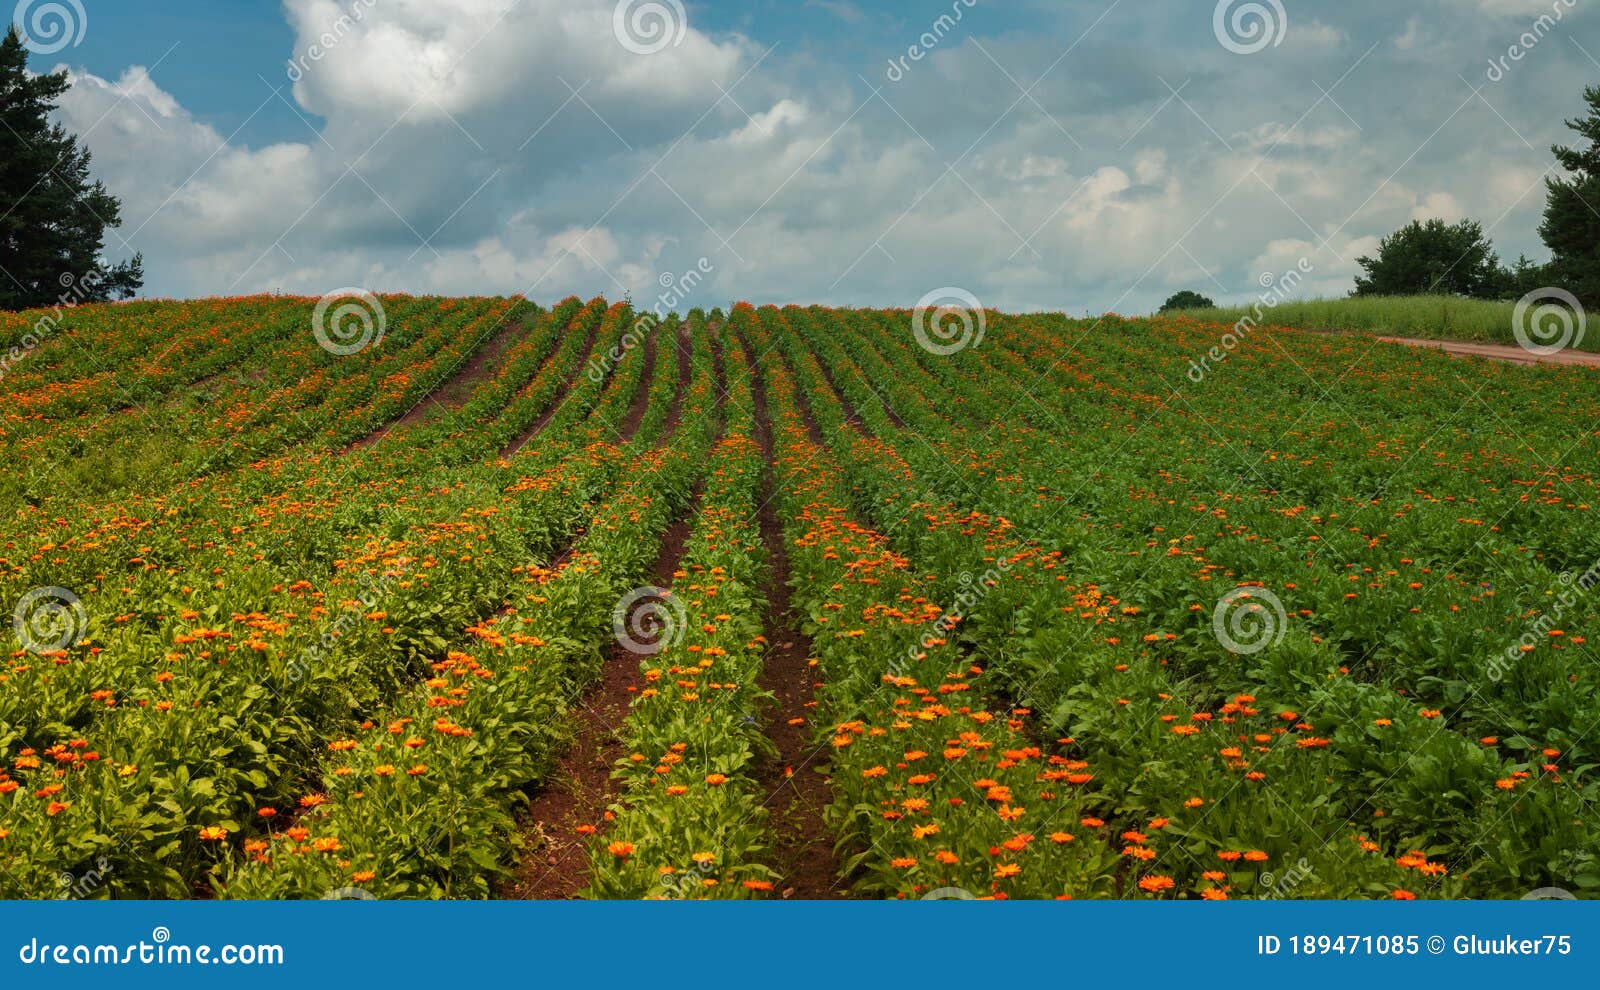 summer agricultural landscape. field hill with green rows of plants and orange wildflowers under a blue cloudy sky. posterolateral